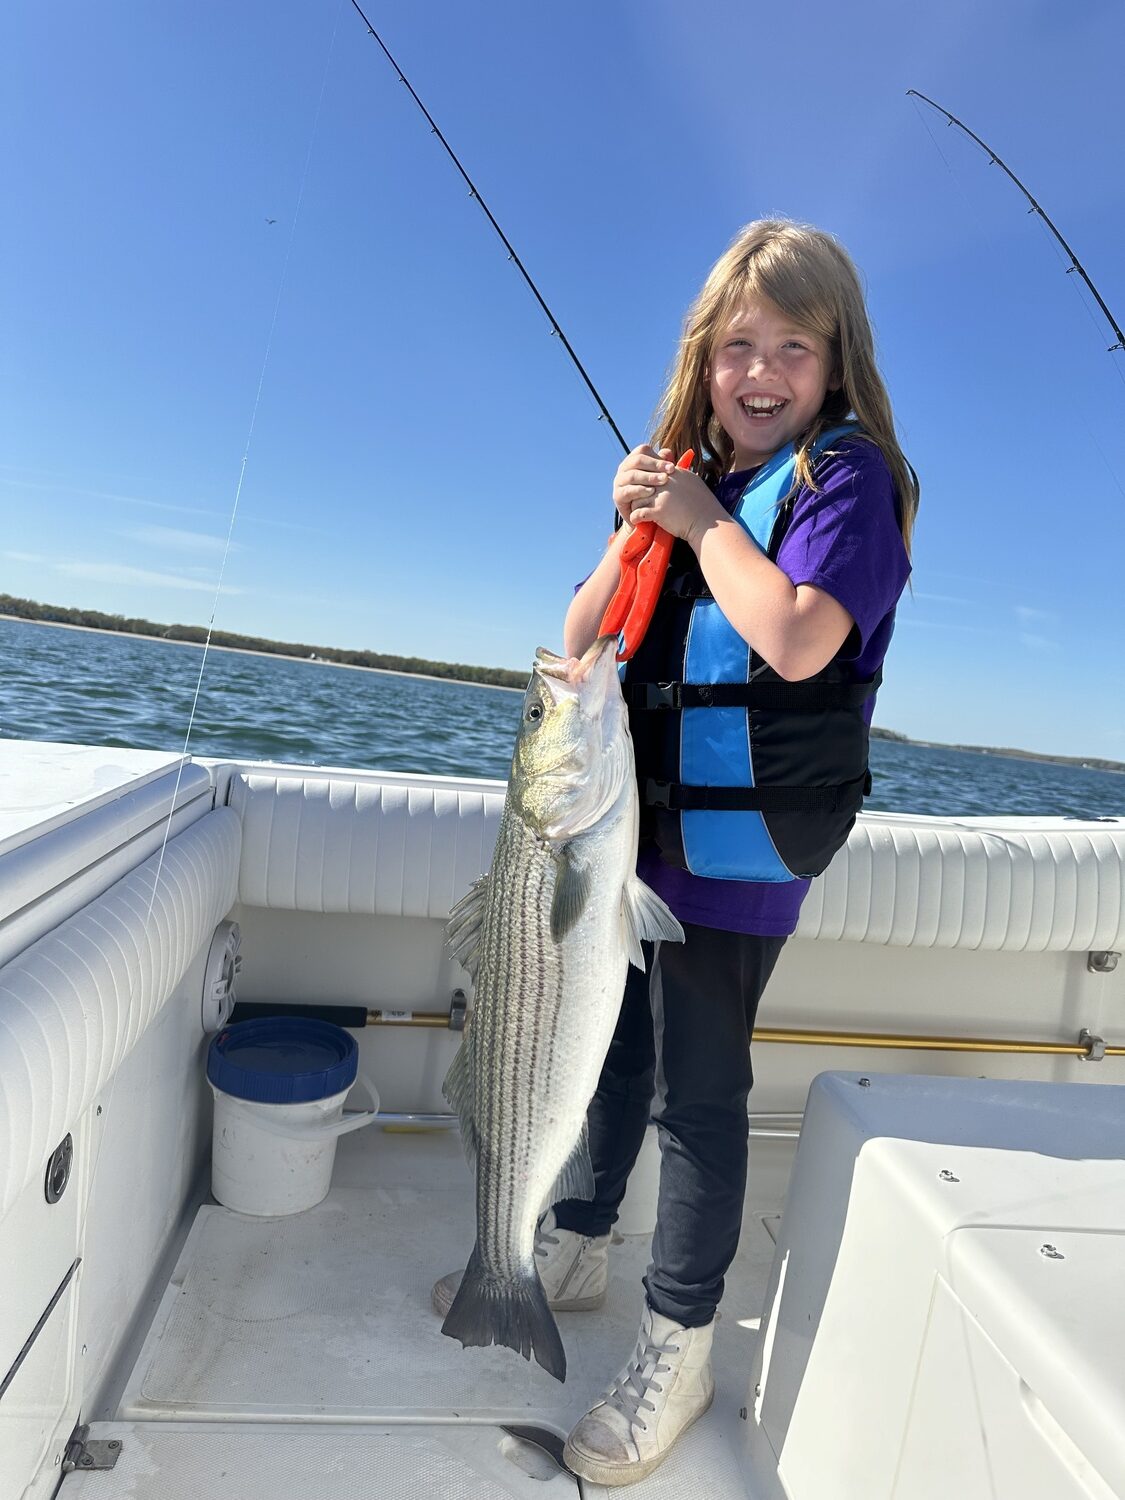 Congratulations to Eleanor McGowin are well deserved for decking her first solo striped bass while fishing in the Peconics with her dad, Bryan, last week.